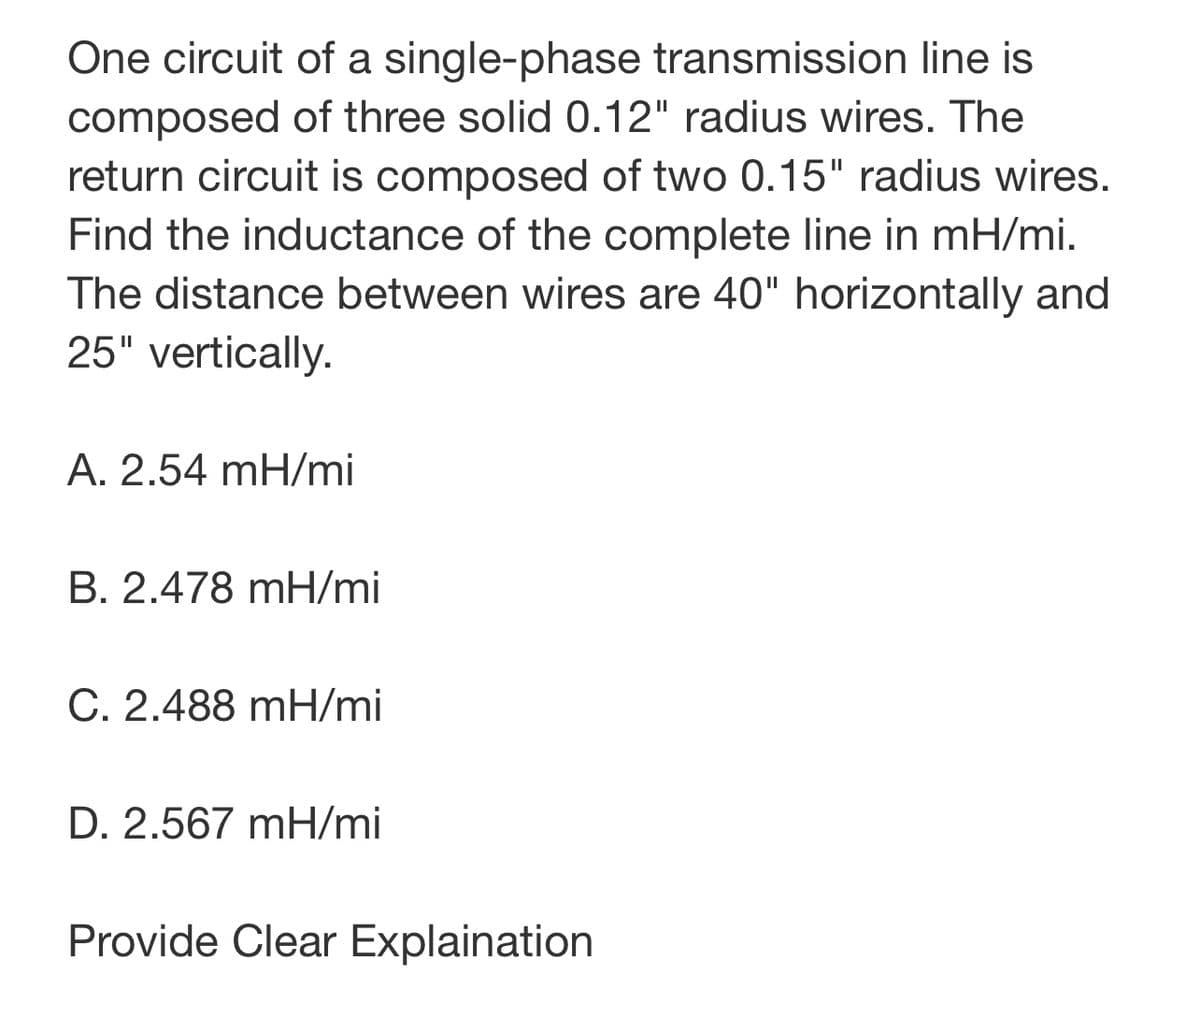 One circuit of a single-phase transmission line is
composed of three solid 0.12" radius wires. The
return circuit is composed of two 0.15" radius wires.
Find the inductance of the complete line in mH/mi.
The distance between wires are 40" horizontally and
25" vertically.
A. 2.54 mH/mi
B. 2.478 mH/mi
C. 2.488 mH/mi
D. 2.567 mH/mi
Provide Clear Explaination